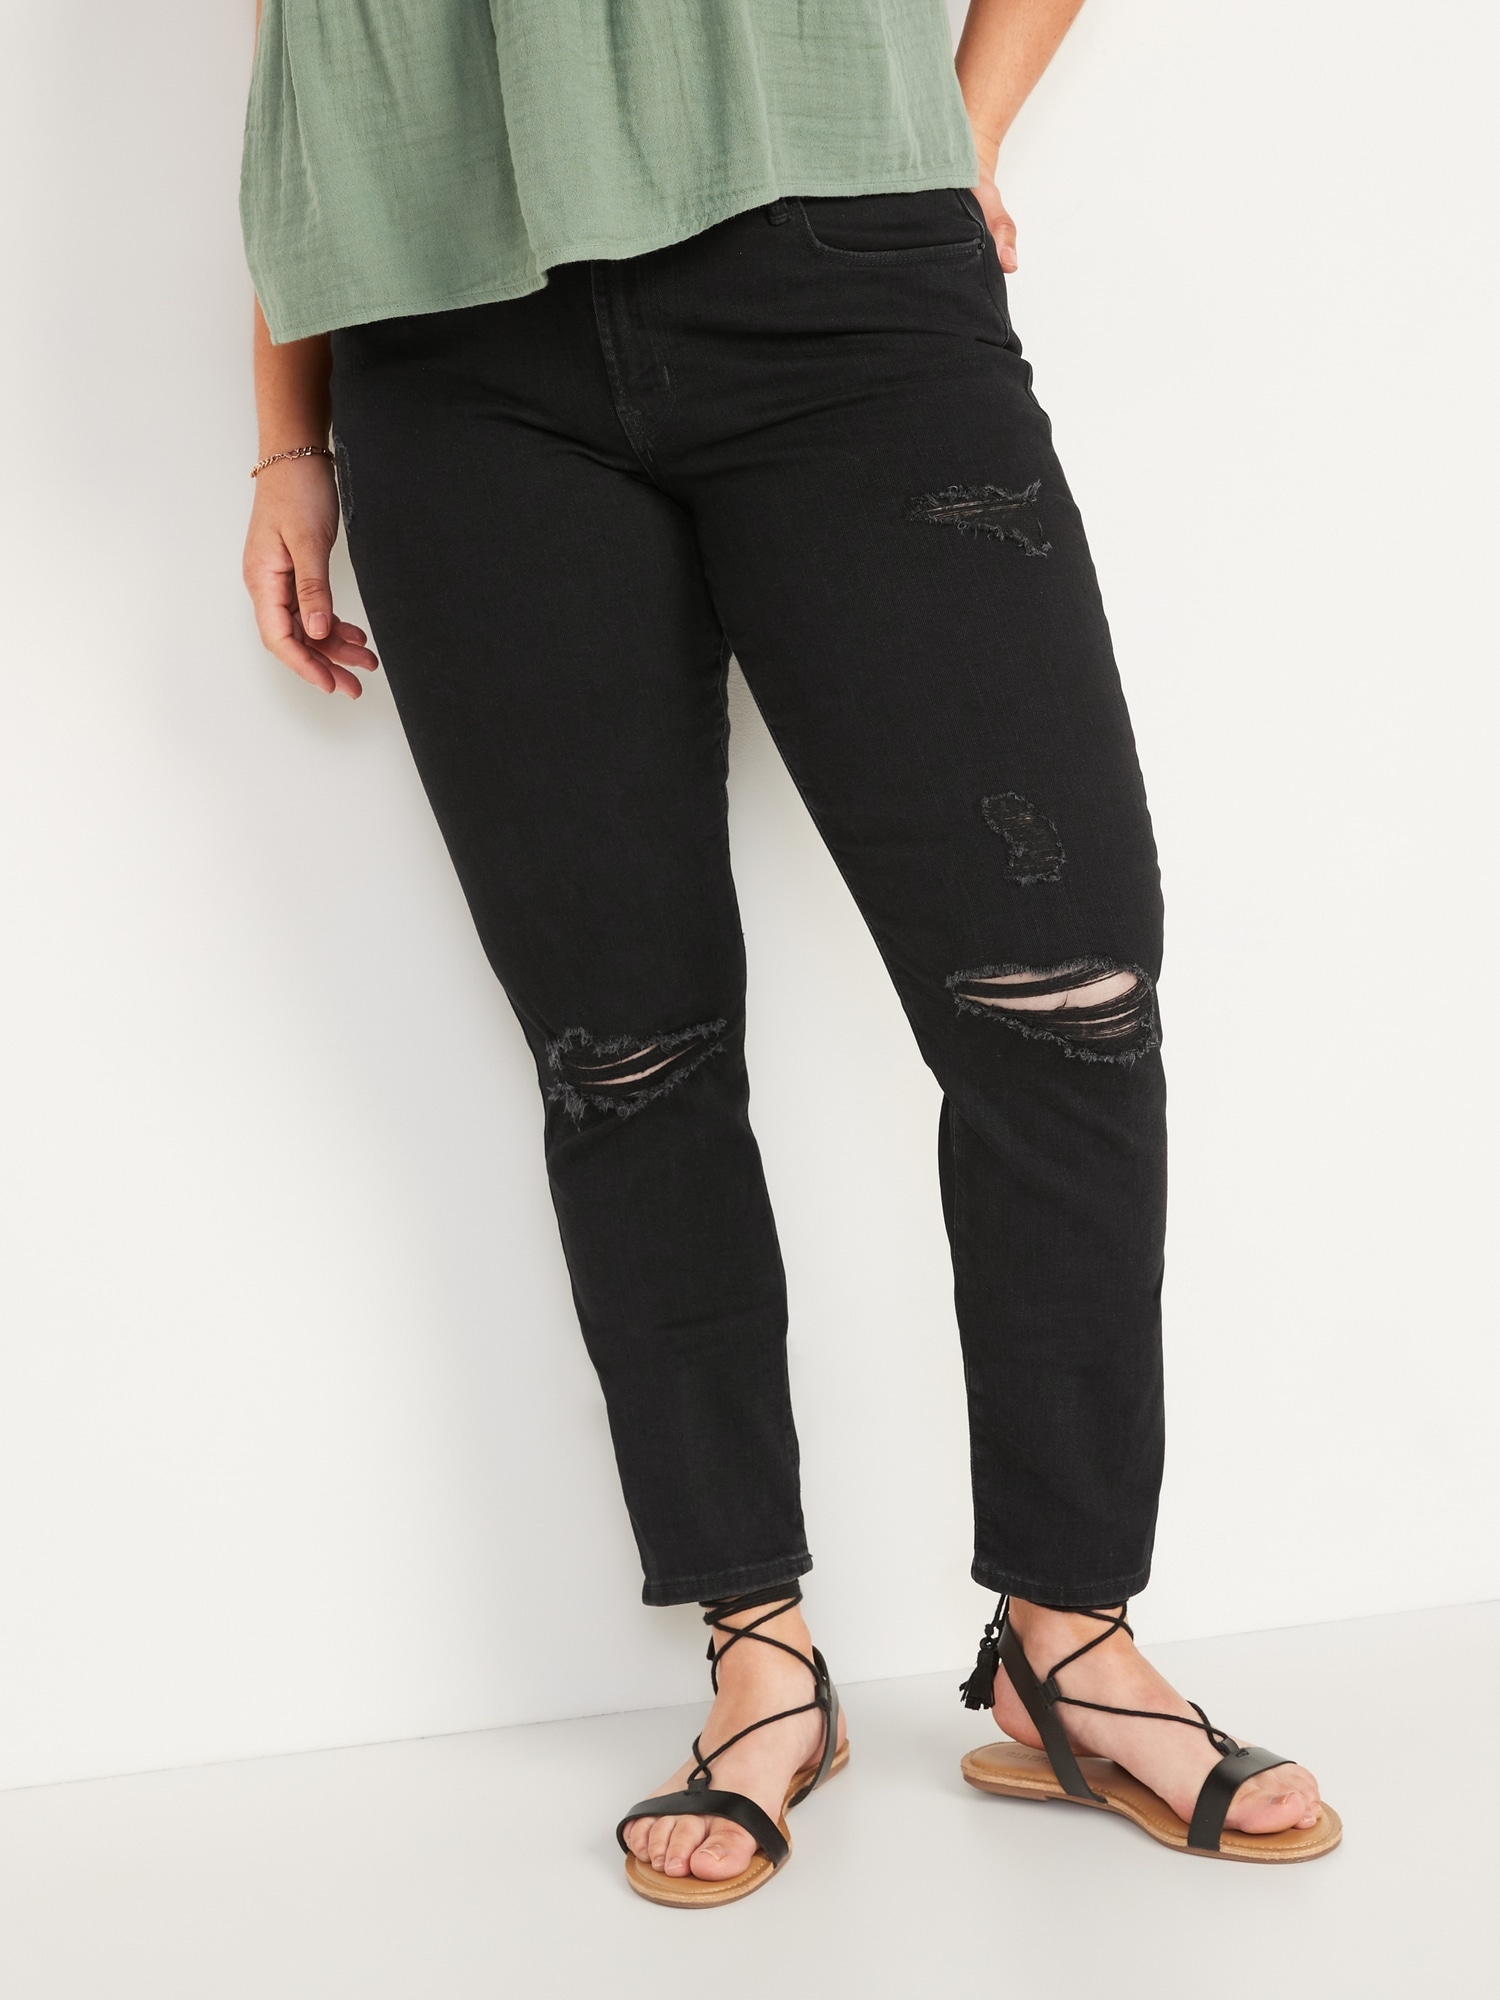 Mid-Rise Power Slim Straight Black Ripped Jeans for Women